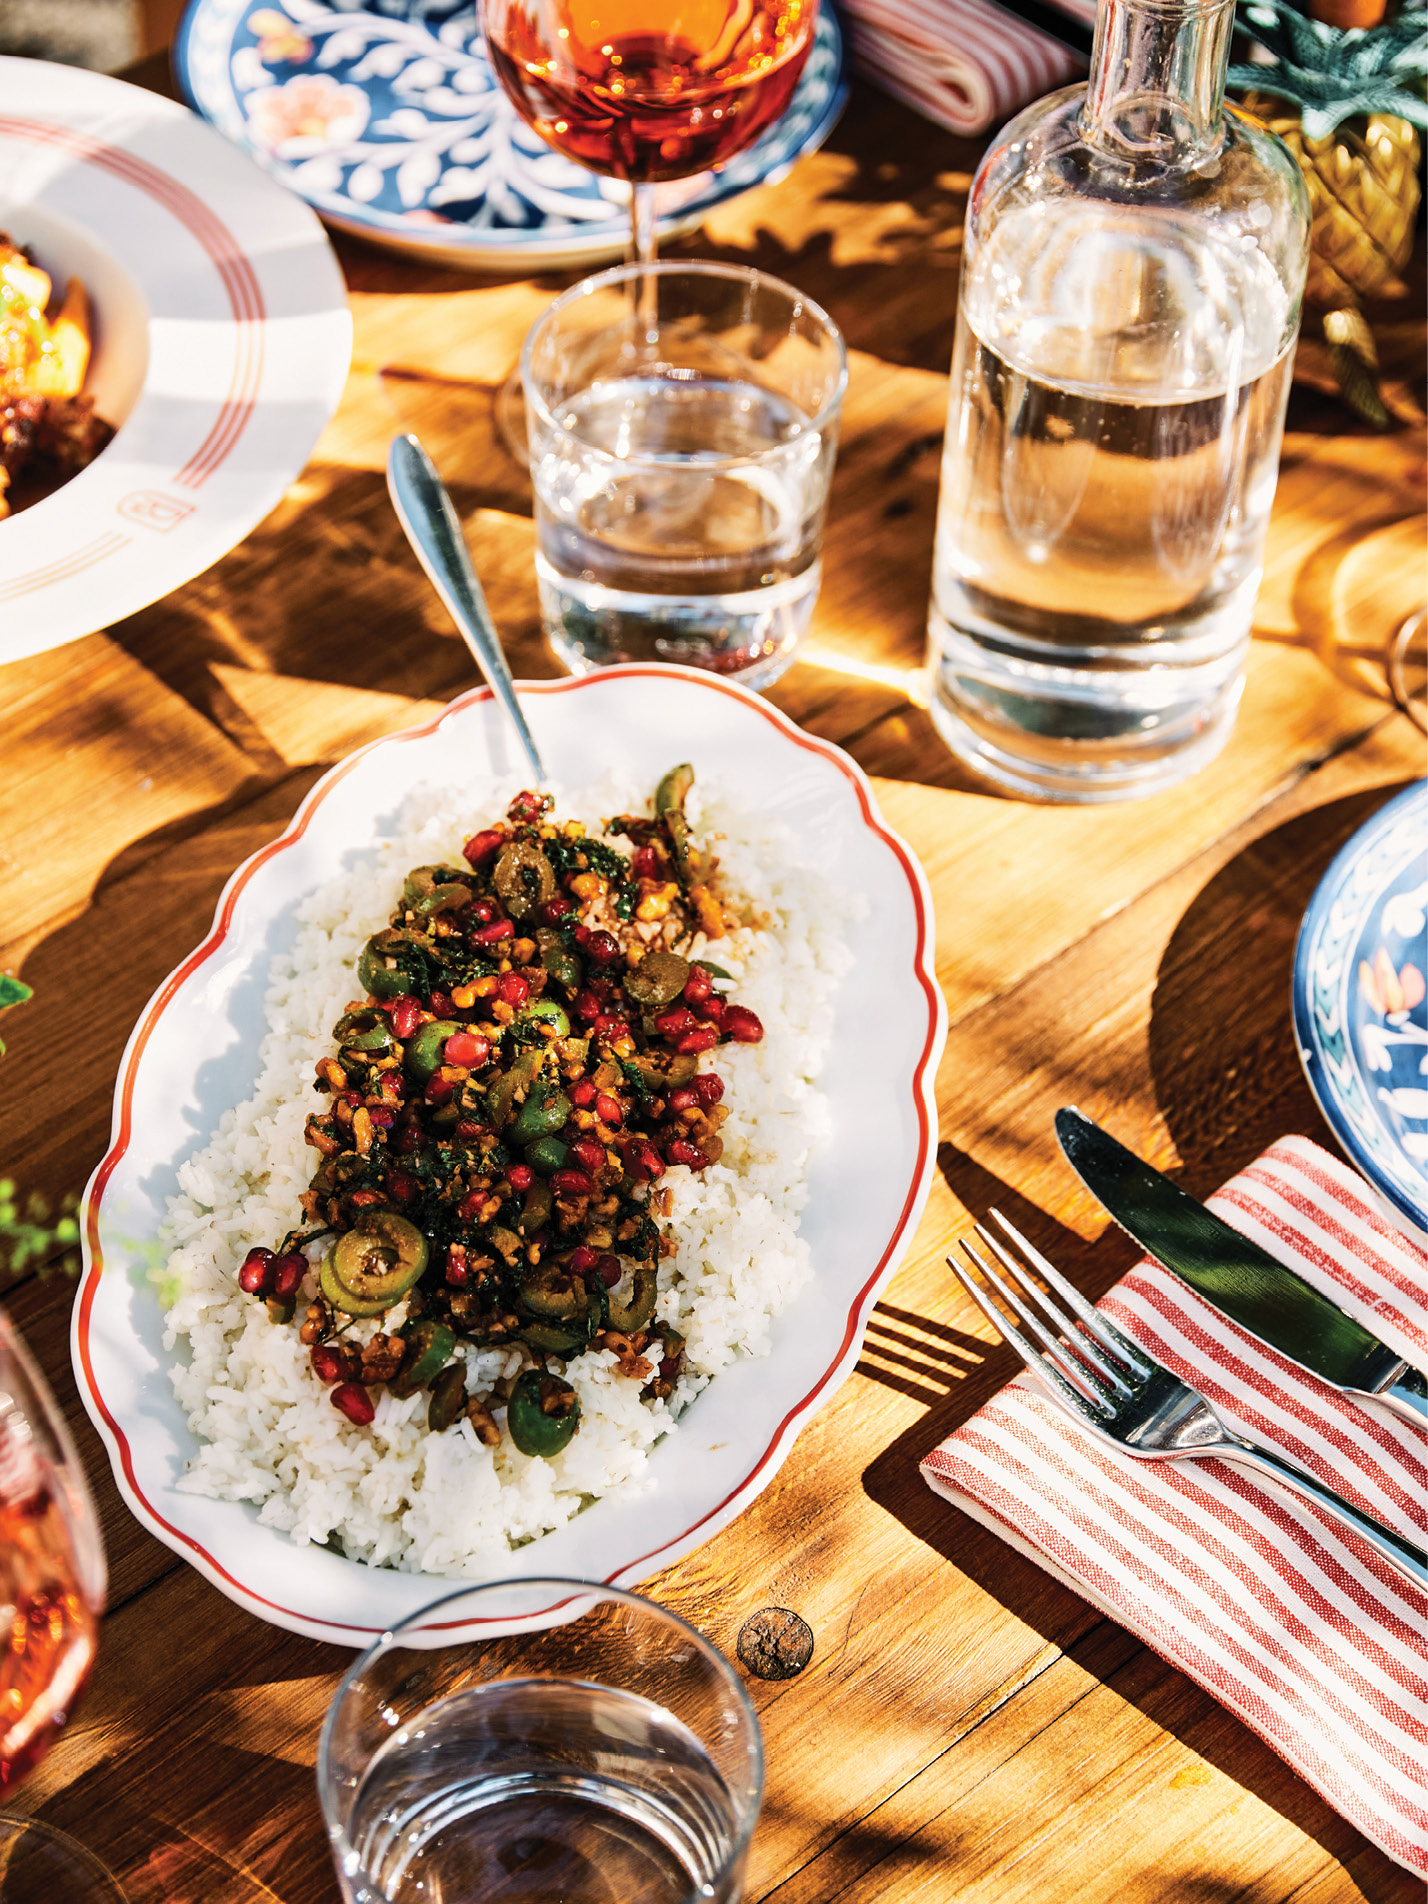 The day’s menu brings together favorites from both Basic Kitchen and the Post House, including this fragrant Charleston Gold rice pilaf with pomegranate, mint, and olives.